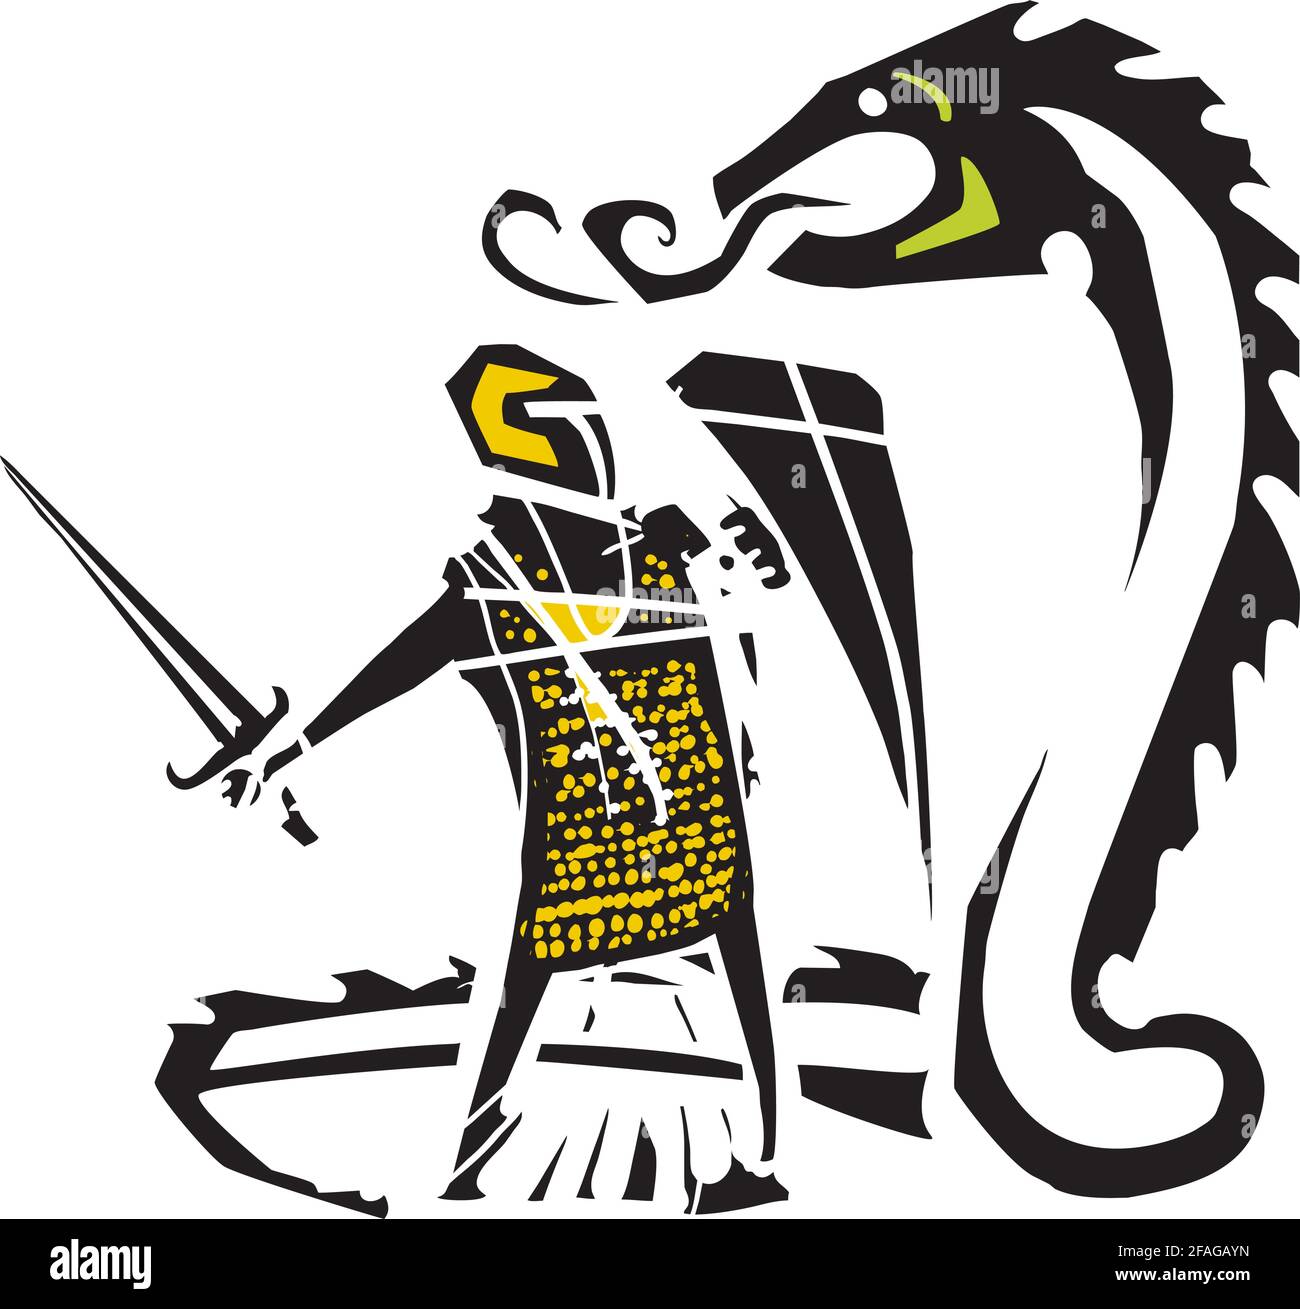 Woodcut expressionist style image of saint george fighting a dragon Stock Vector